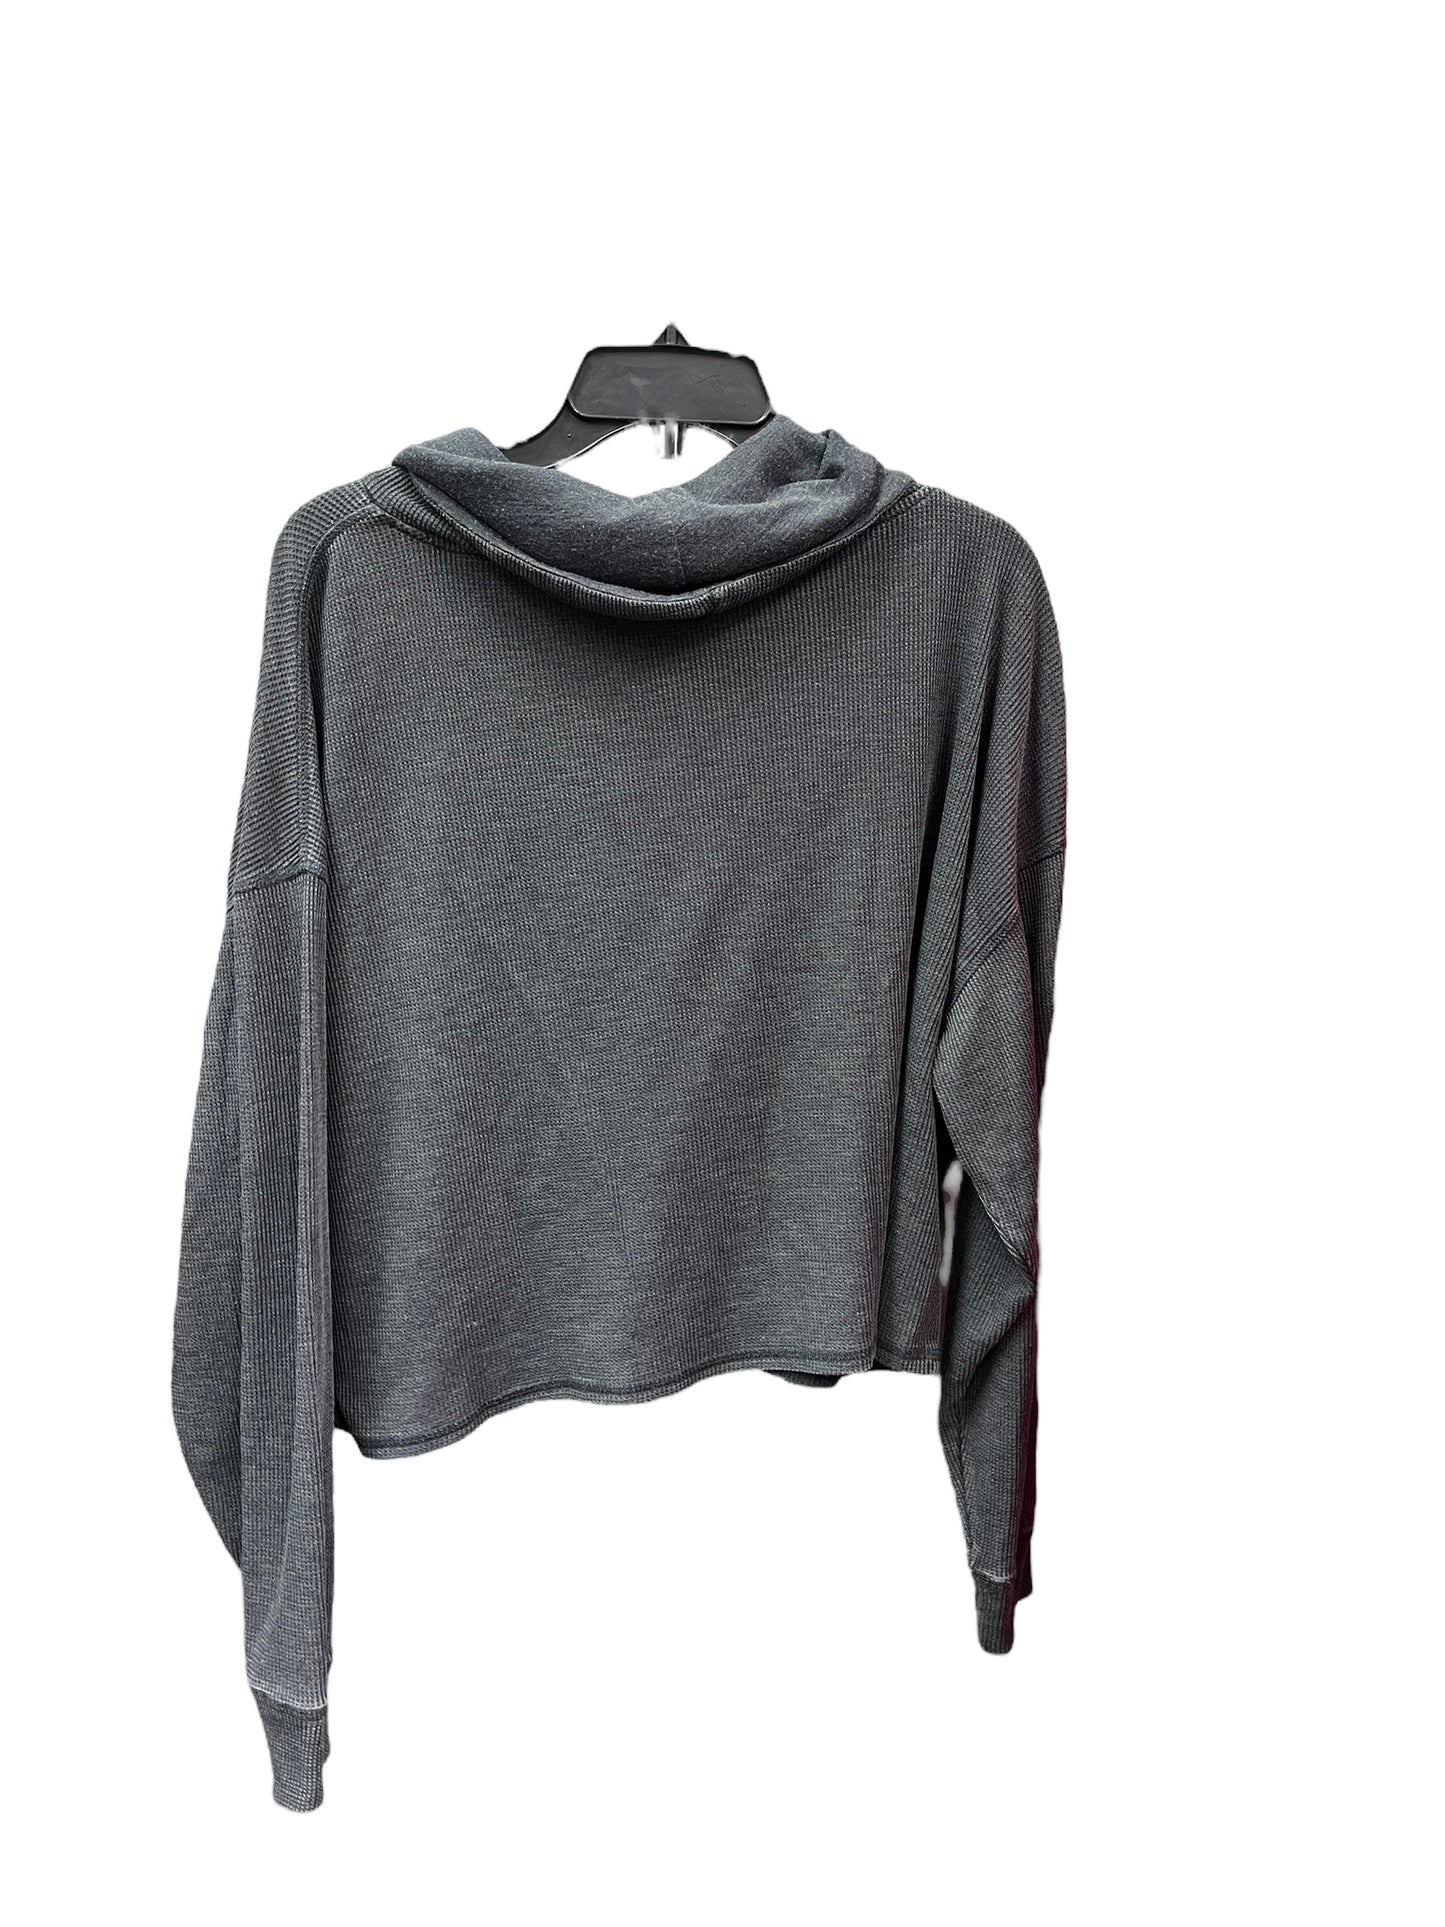 Top Long Sleeve By Mono B  Size: M